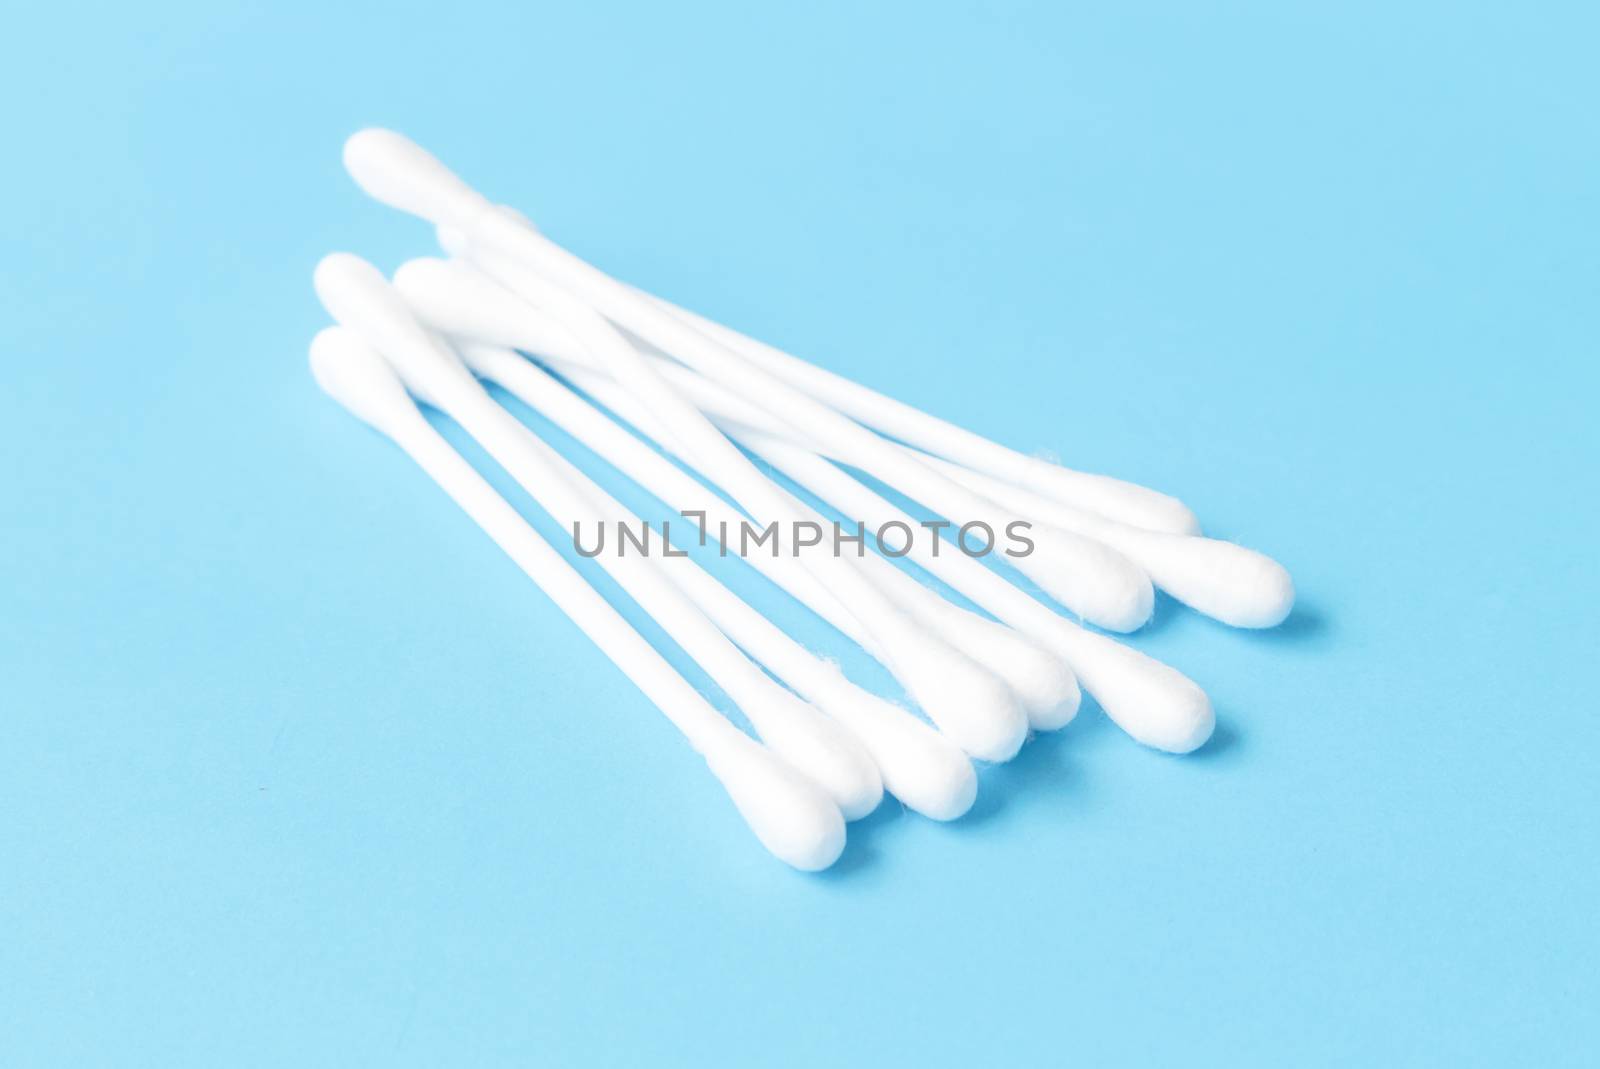 Cotton buds on light blue background, health care concept